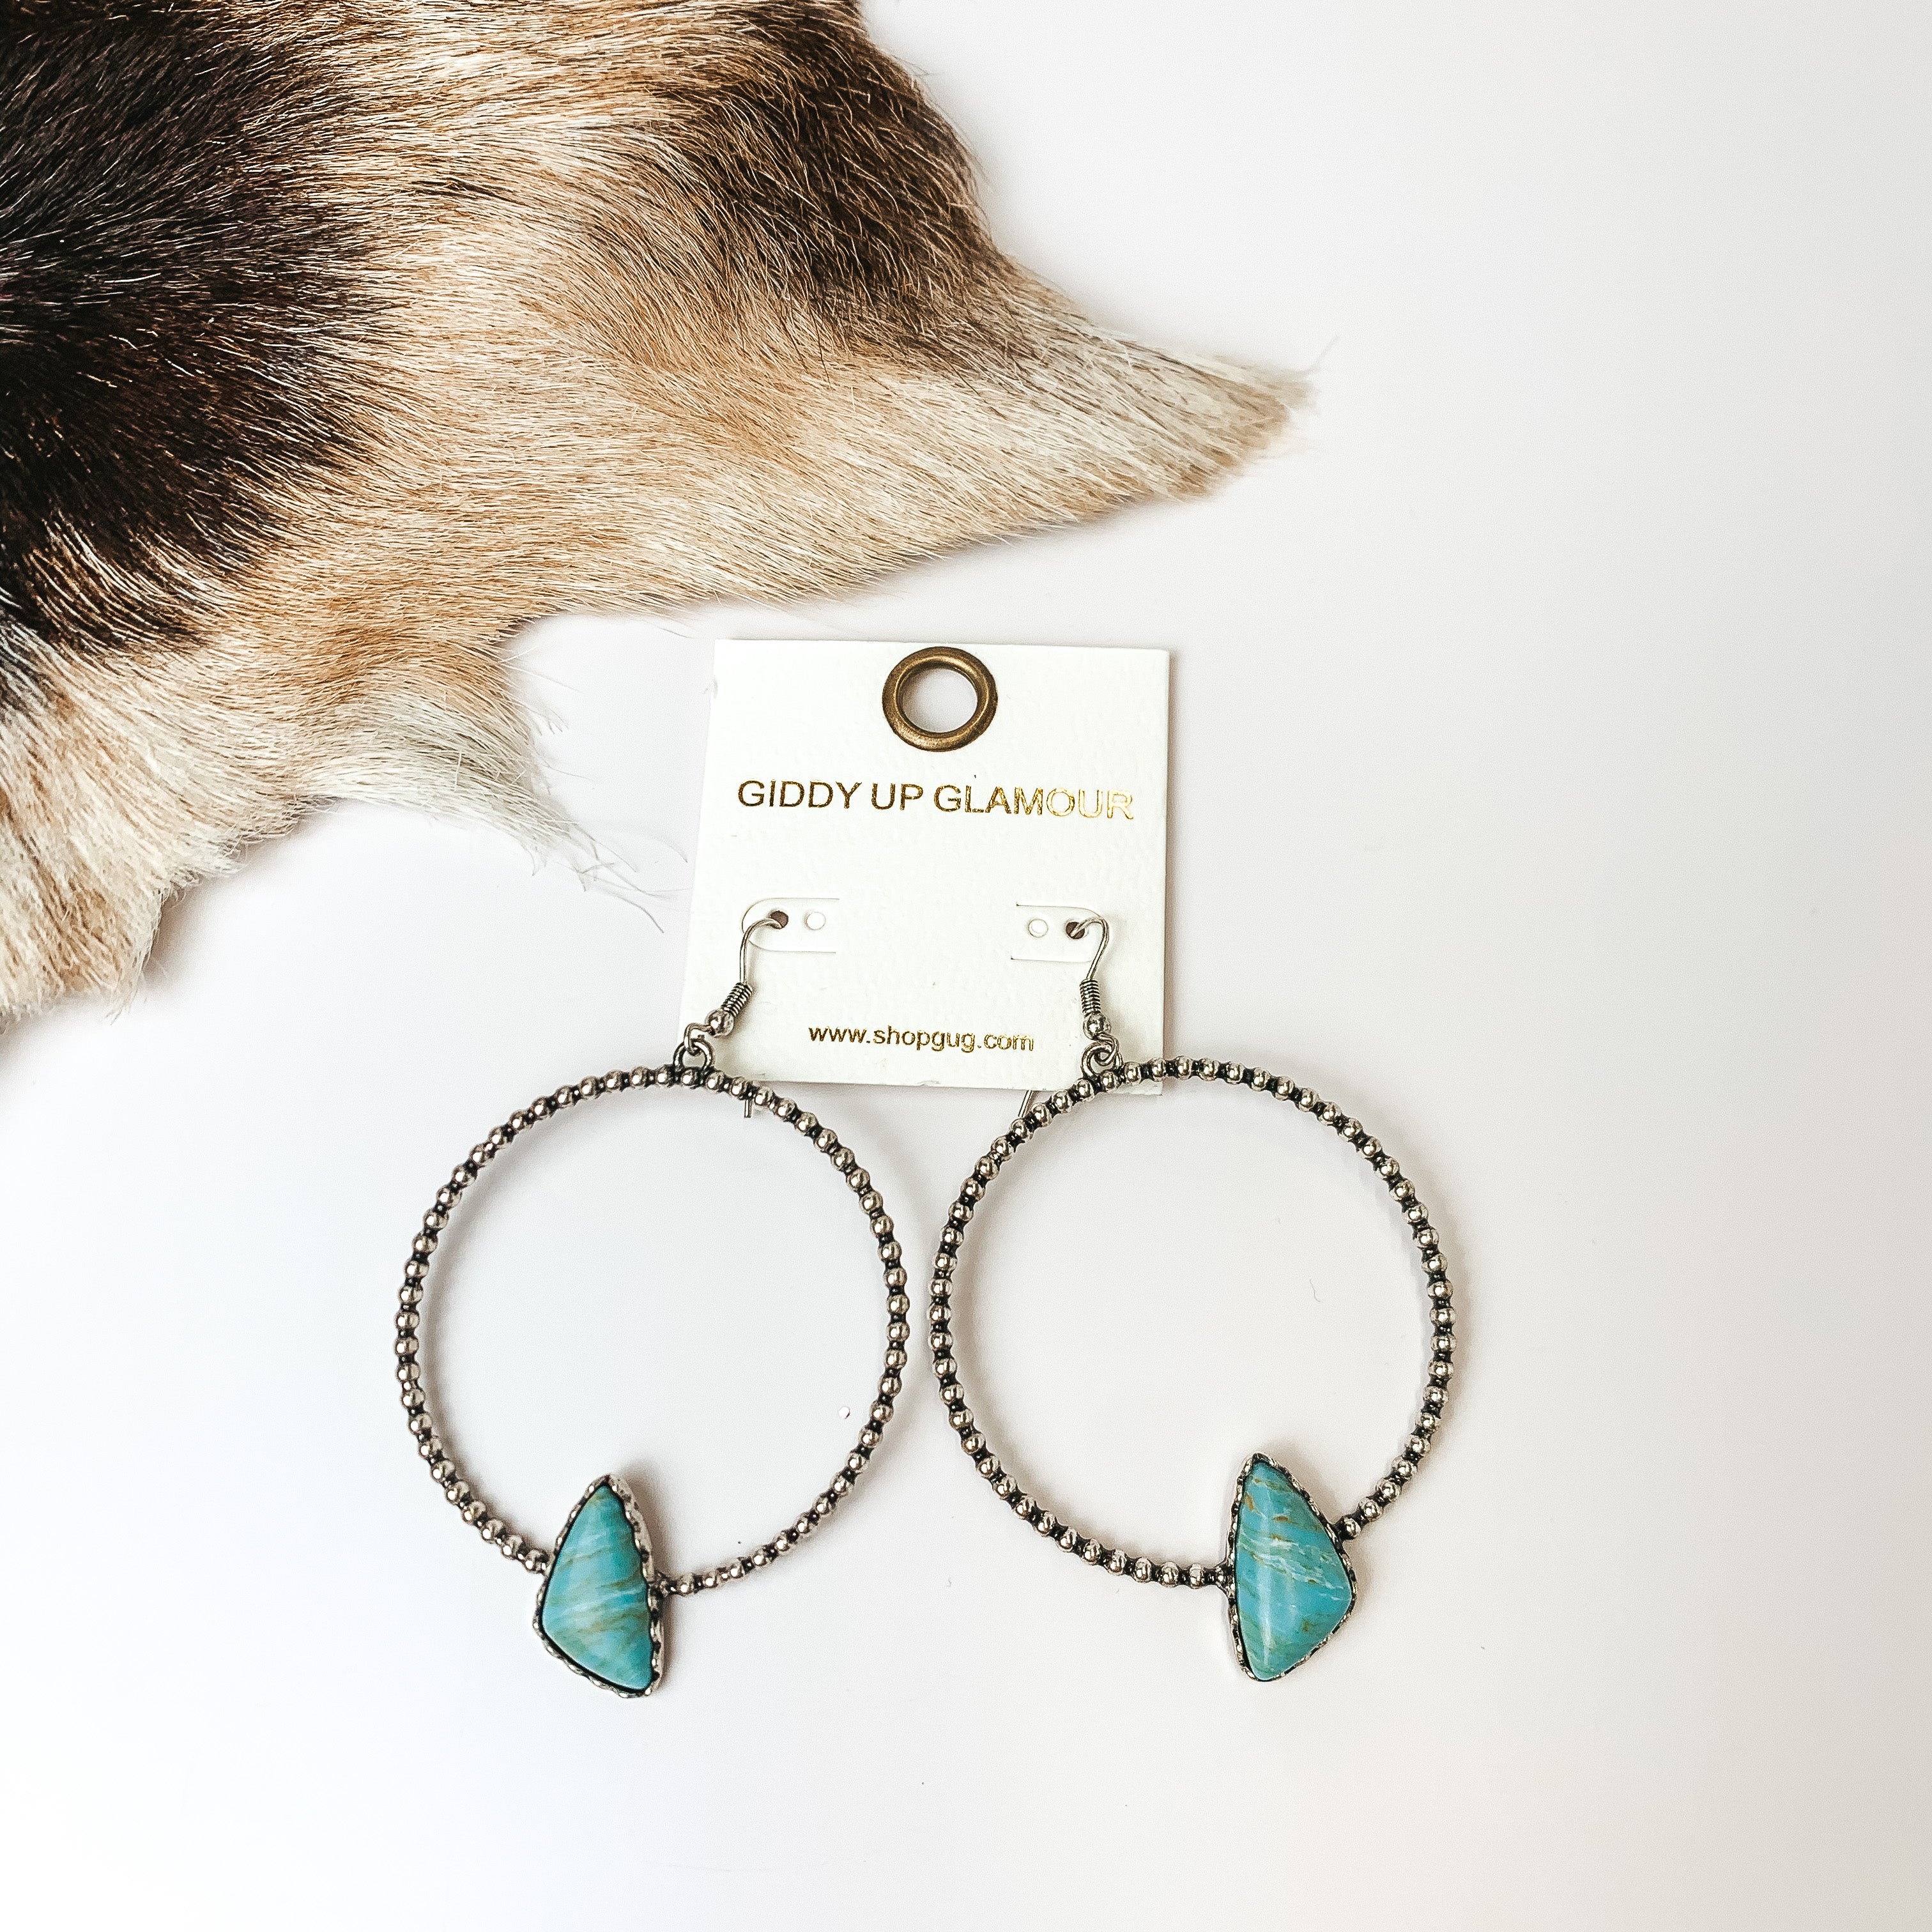 Silver Tone Textured Hoop Earring with Turquoise Stone. Pictured on a white background with faux animal skin on the top left corner. 